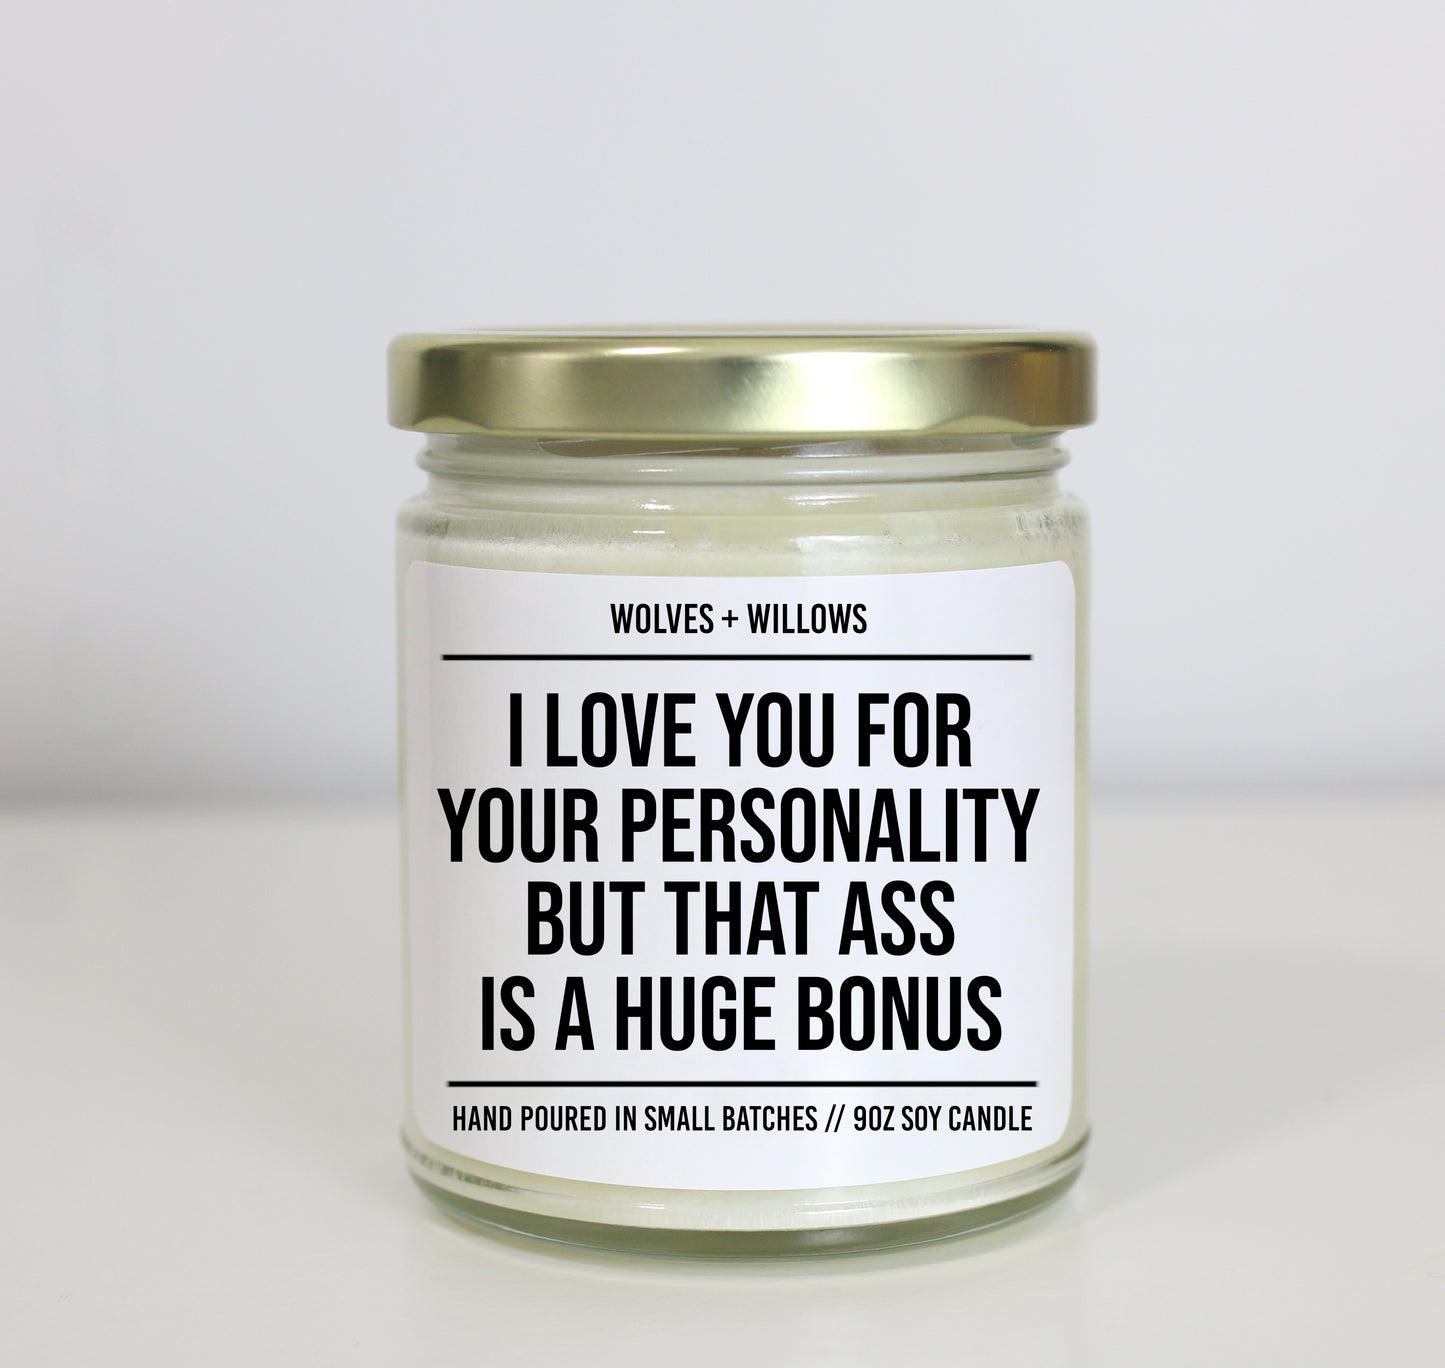 I Love You For Your Personality But That Ass Is A Huge Bonus - Gift for Girlfriend or Wife